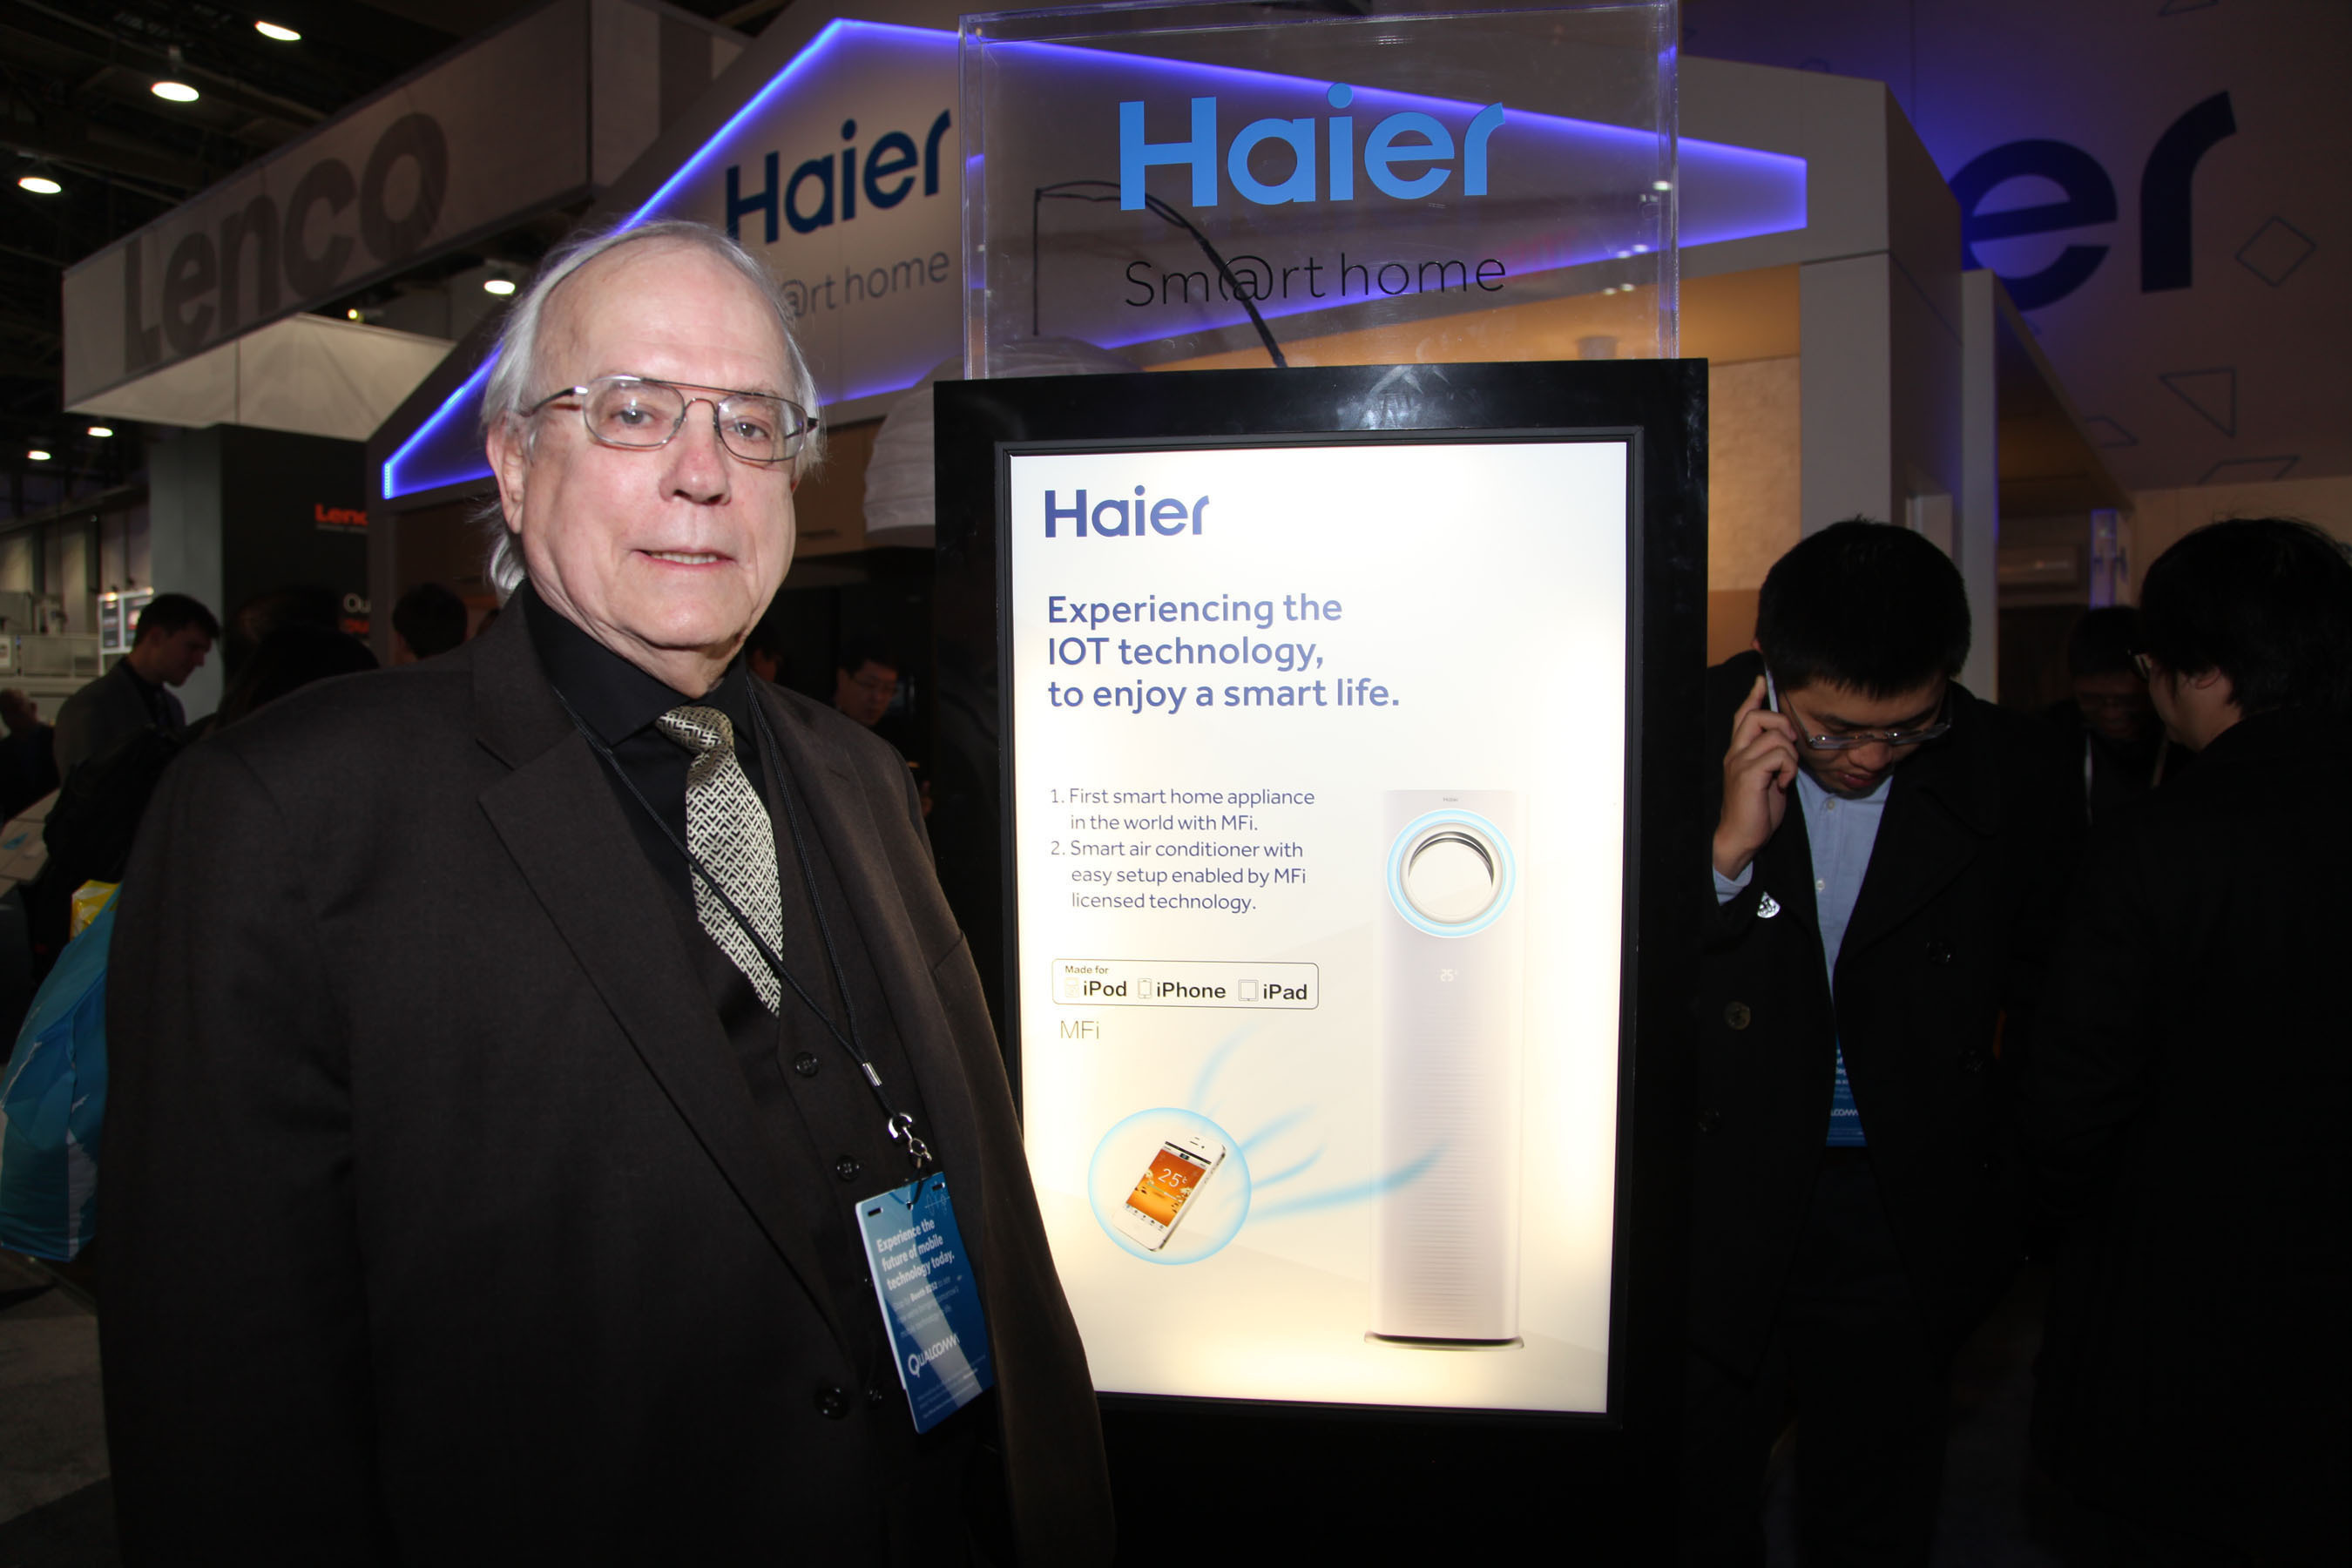 Haier smart home enables a new way of life in the Internet era and brings you the smart living experience that you want. (PRNewsFoto/Haier) (PRNewsFoto/HAIER)